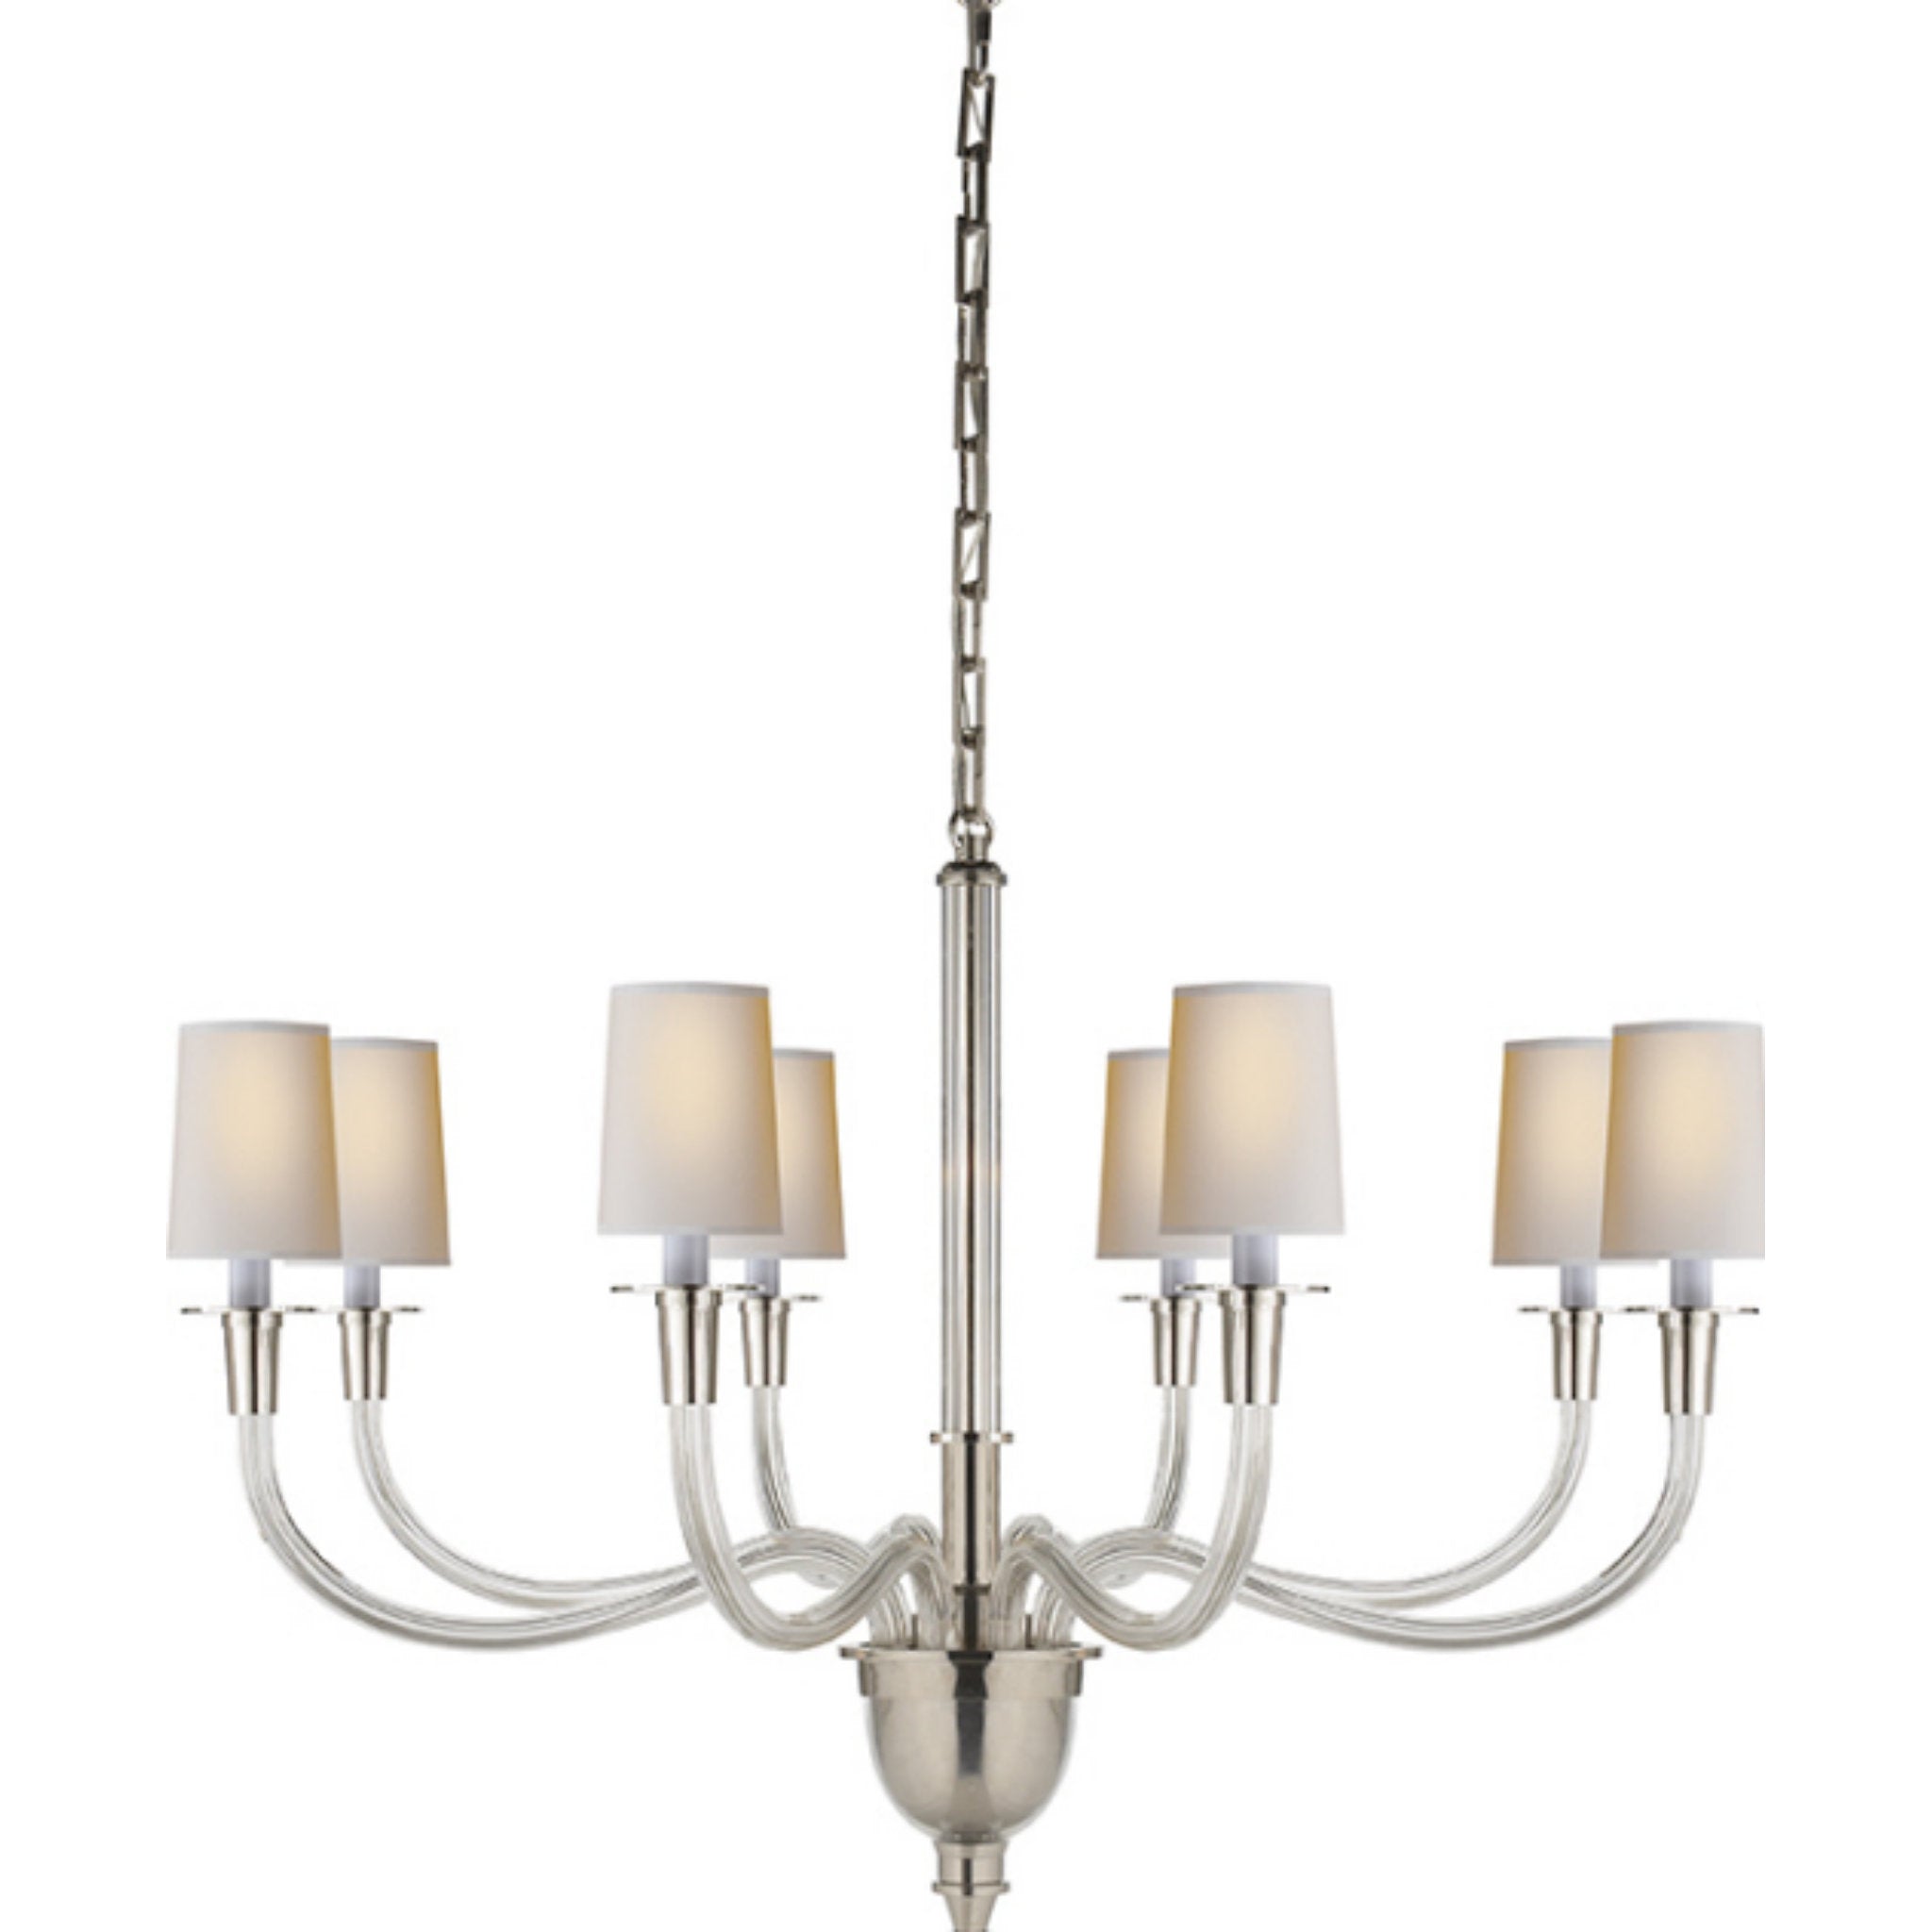 Thomas O'Brien Vivian Large One-Tier Chandelier in Polished Nickel with Natural Paper Shades